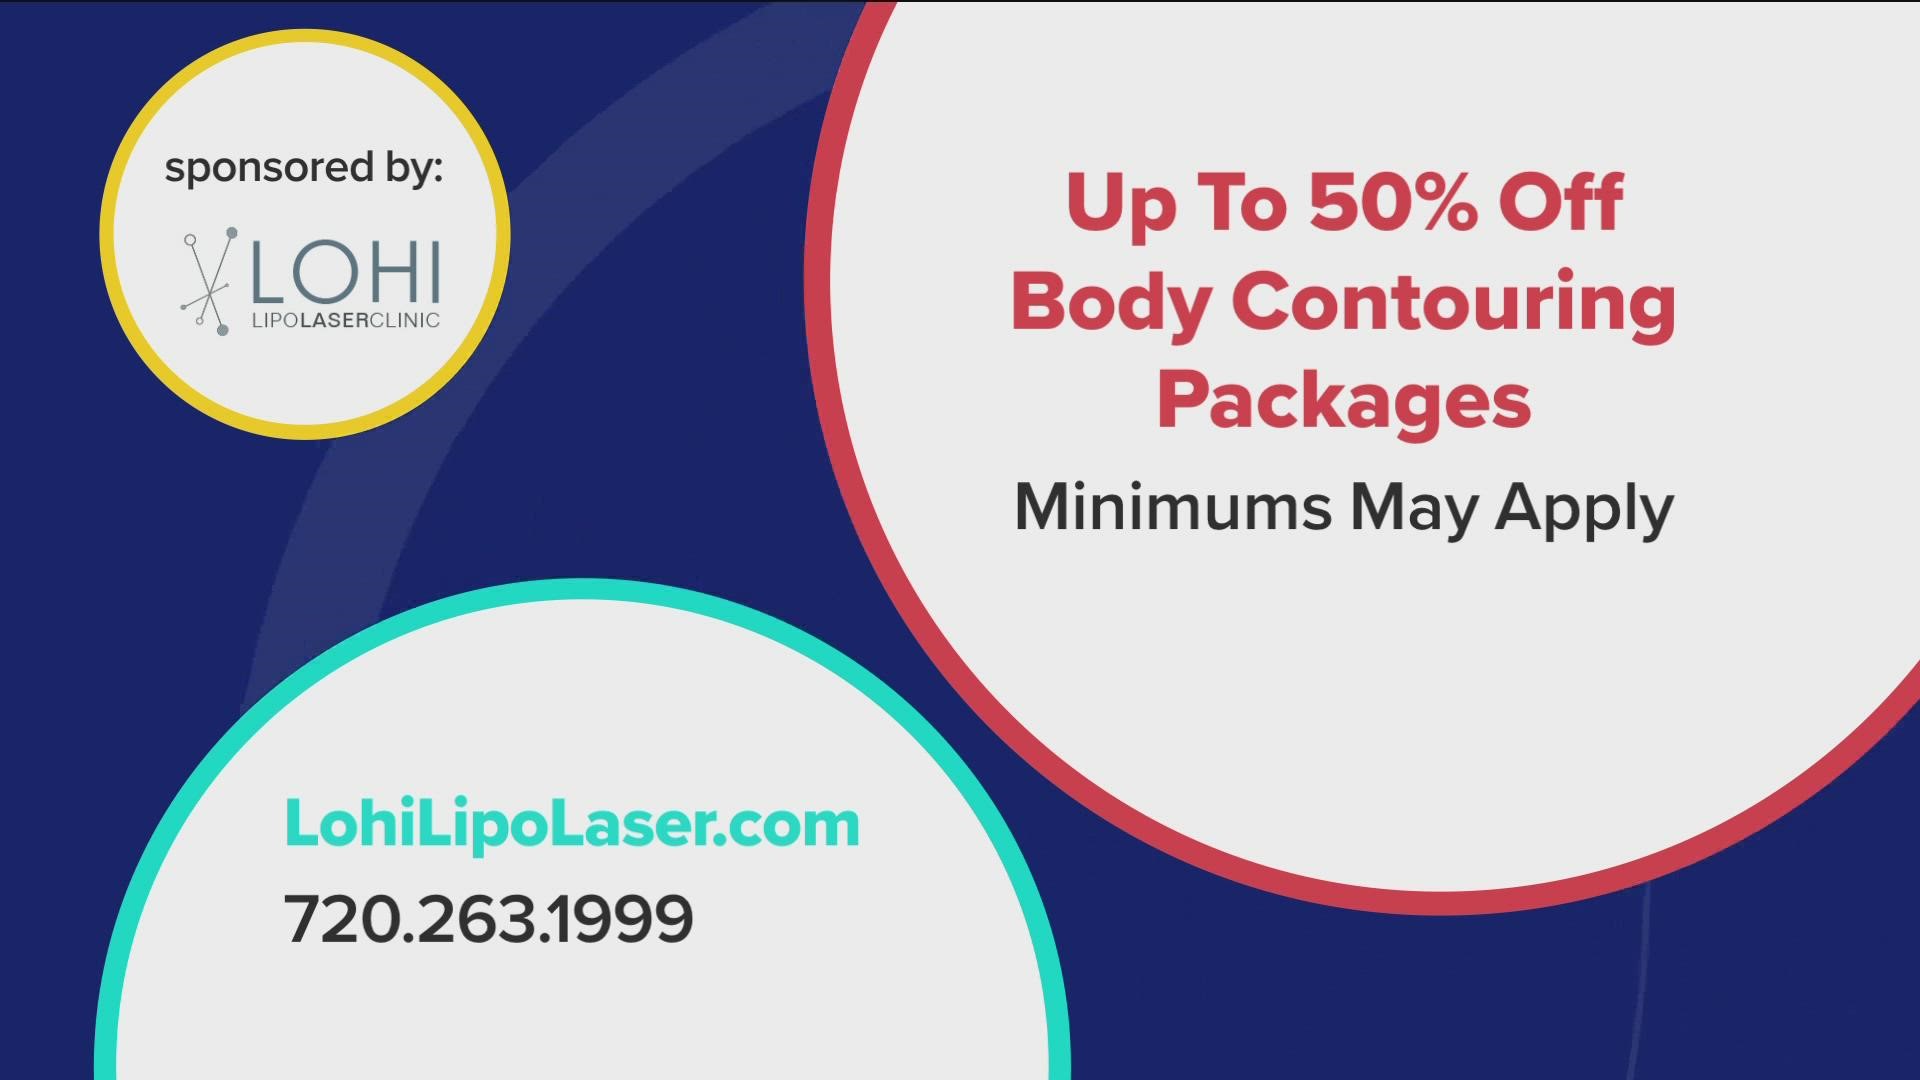 Call 303.954.0896 or visit LohiLipoLaser.com to get started. Right now you can get up to 50% off your next treatment package! **PAID CONTENT**